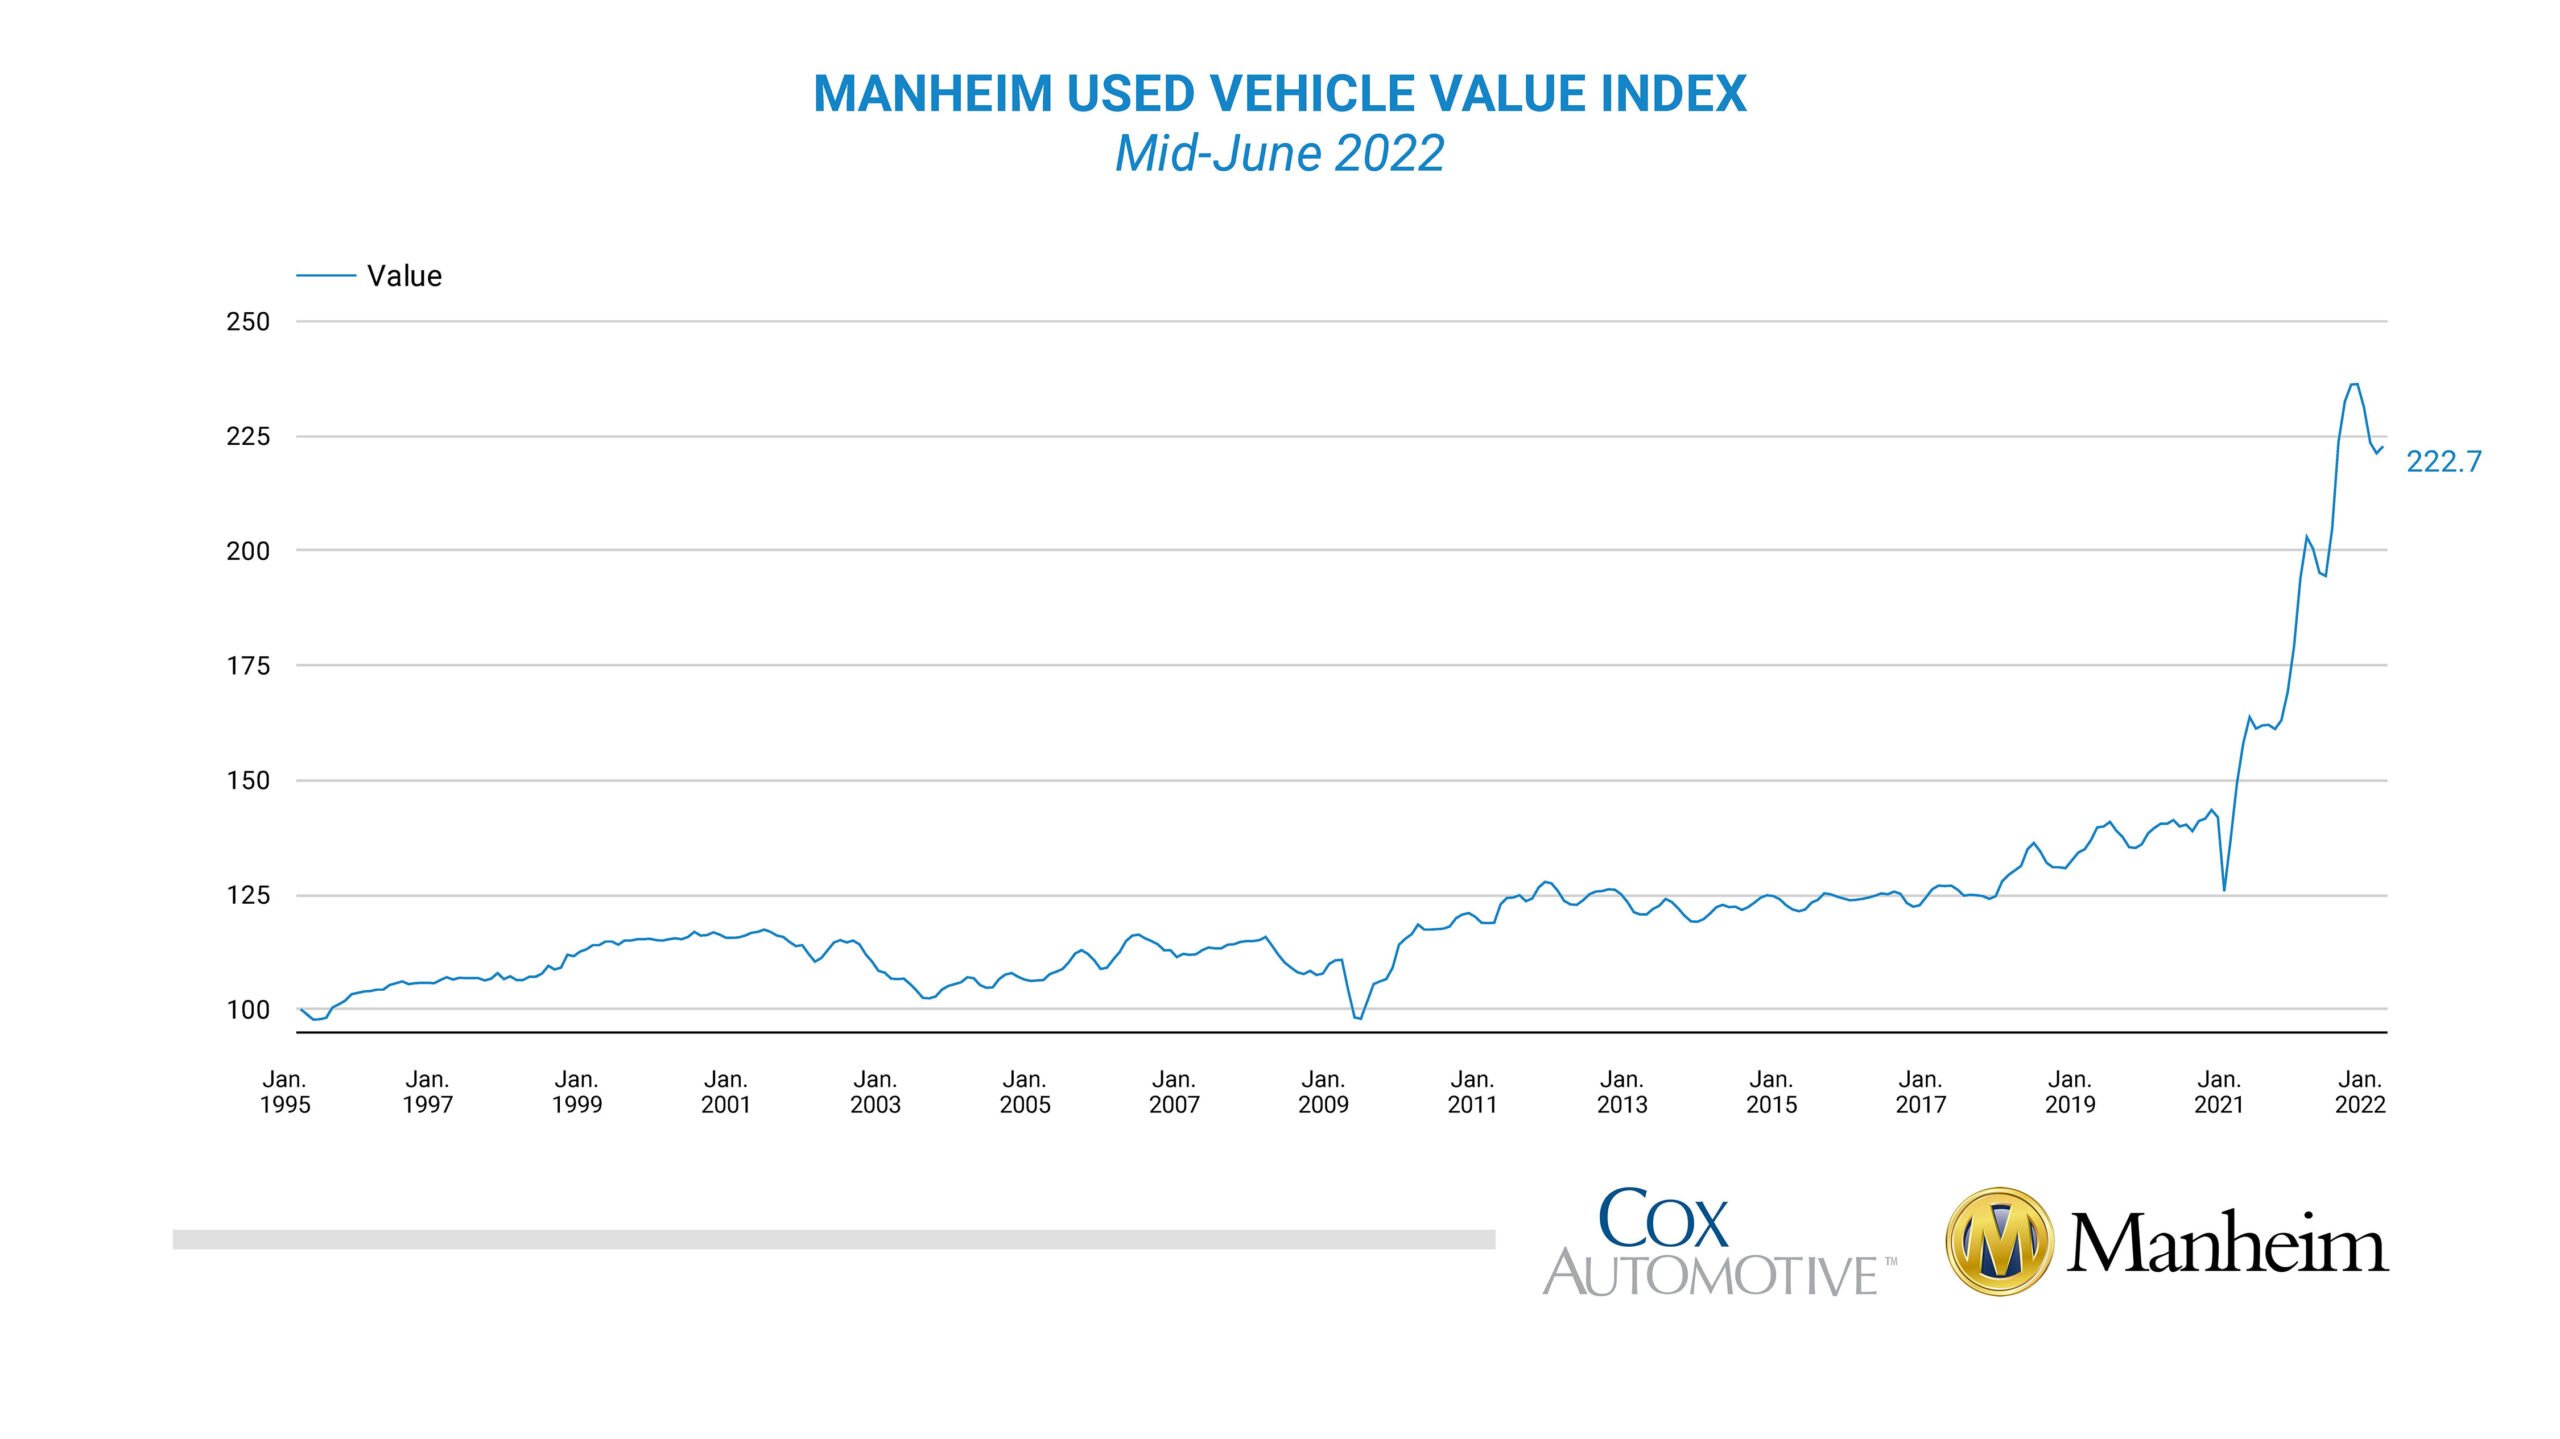 The Manheim Used Vehicle Value Index as of June 15 2022